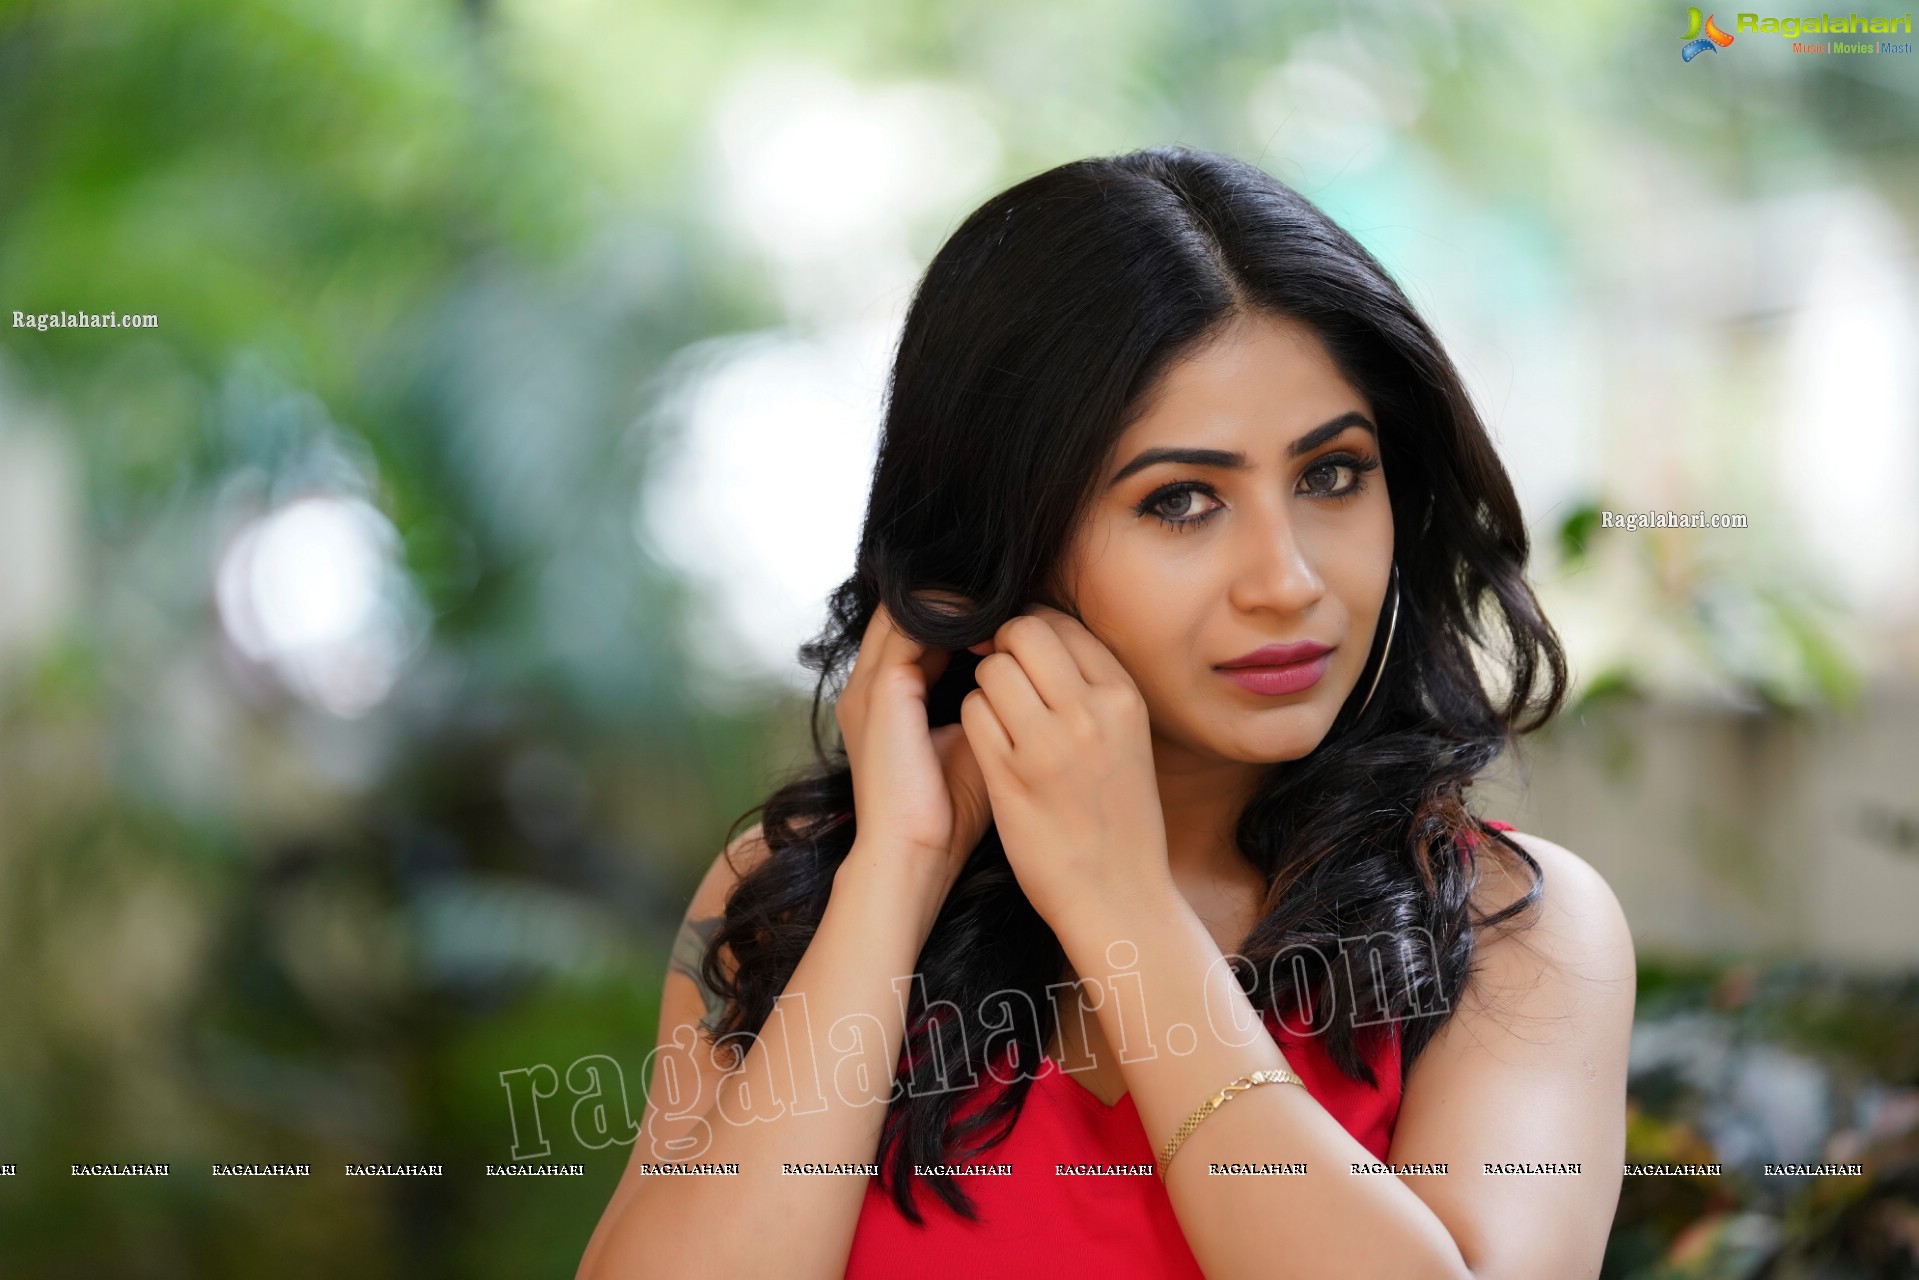 Madhulagna Das in Red Tank Top and Black Jeans, Exclusive Photoshoot